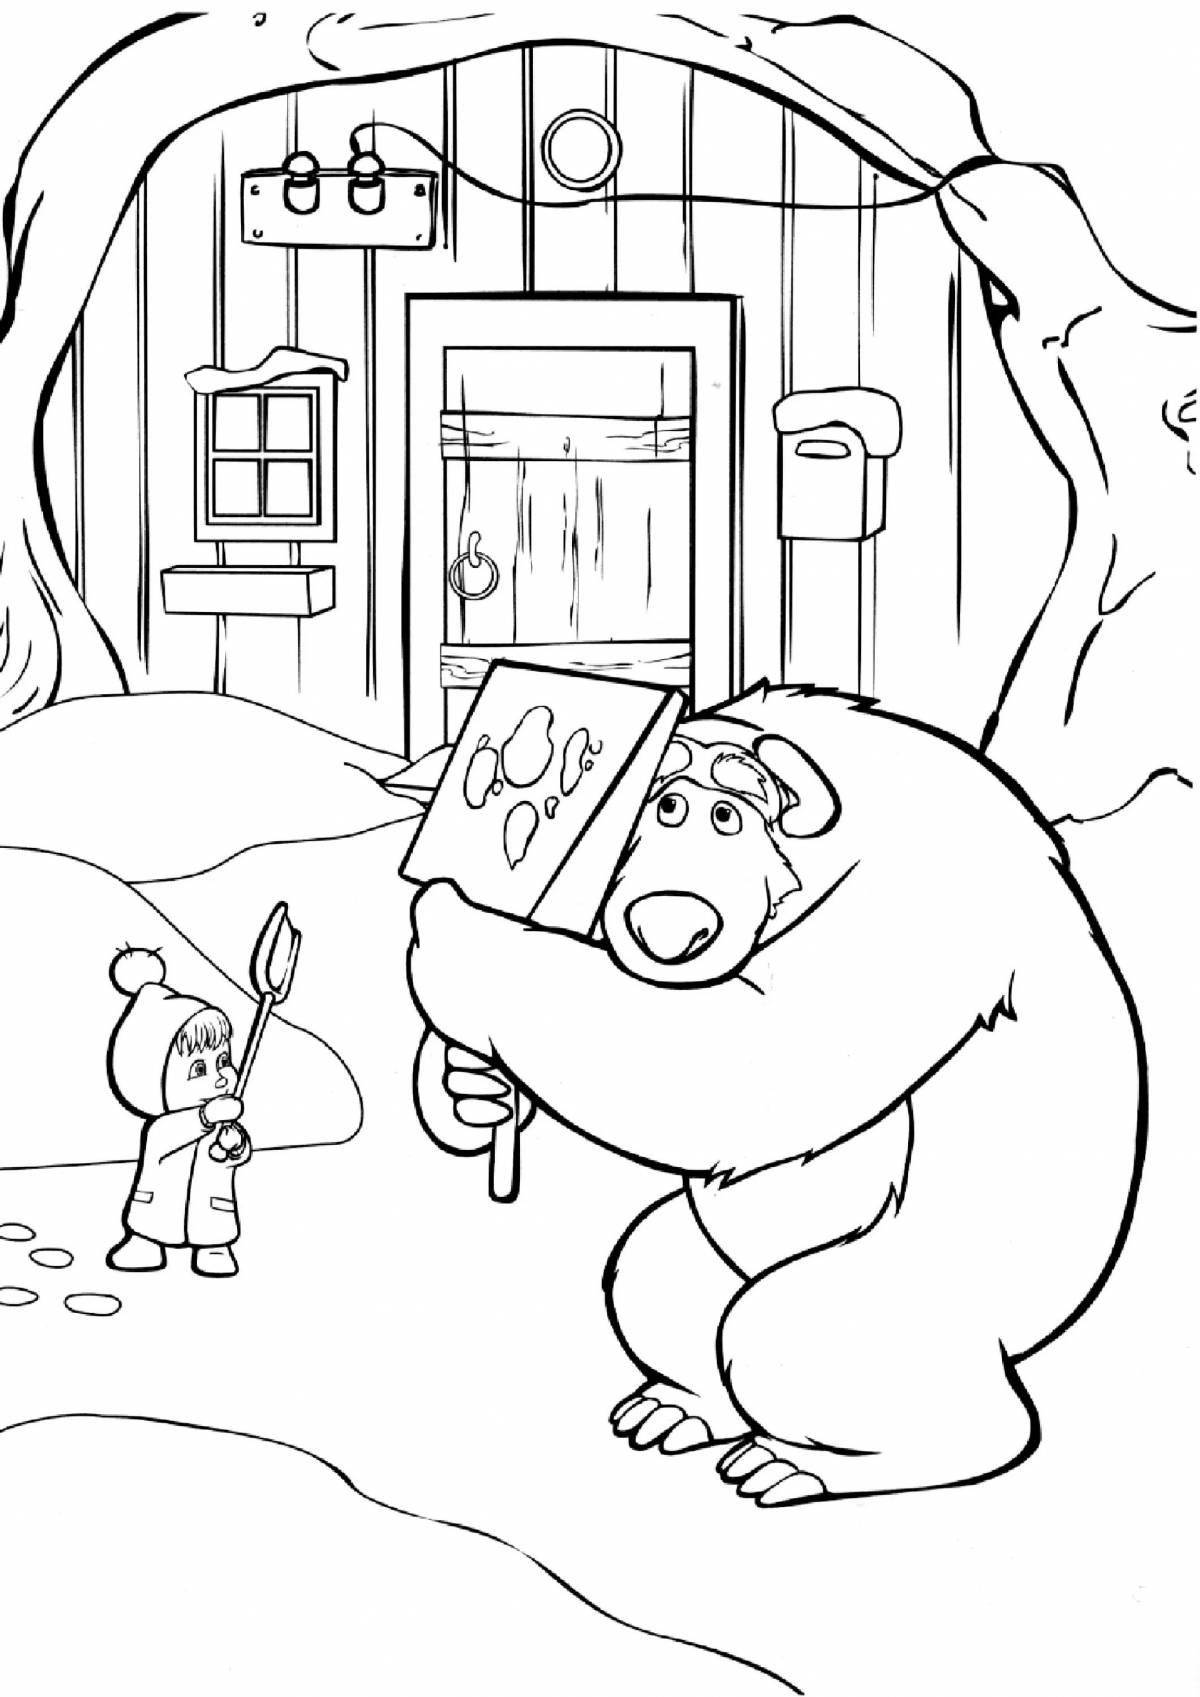 Coloring page adorable bear from masha and bear